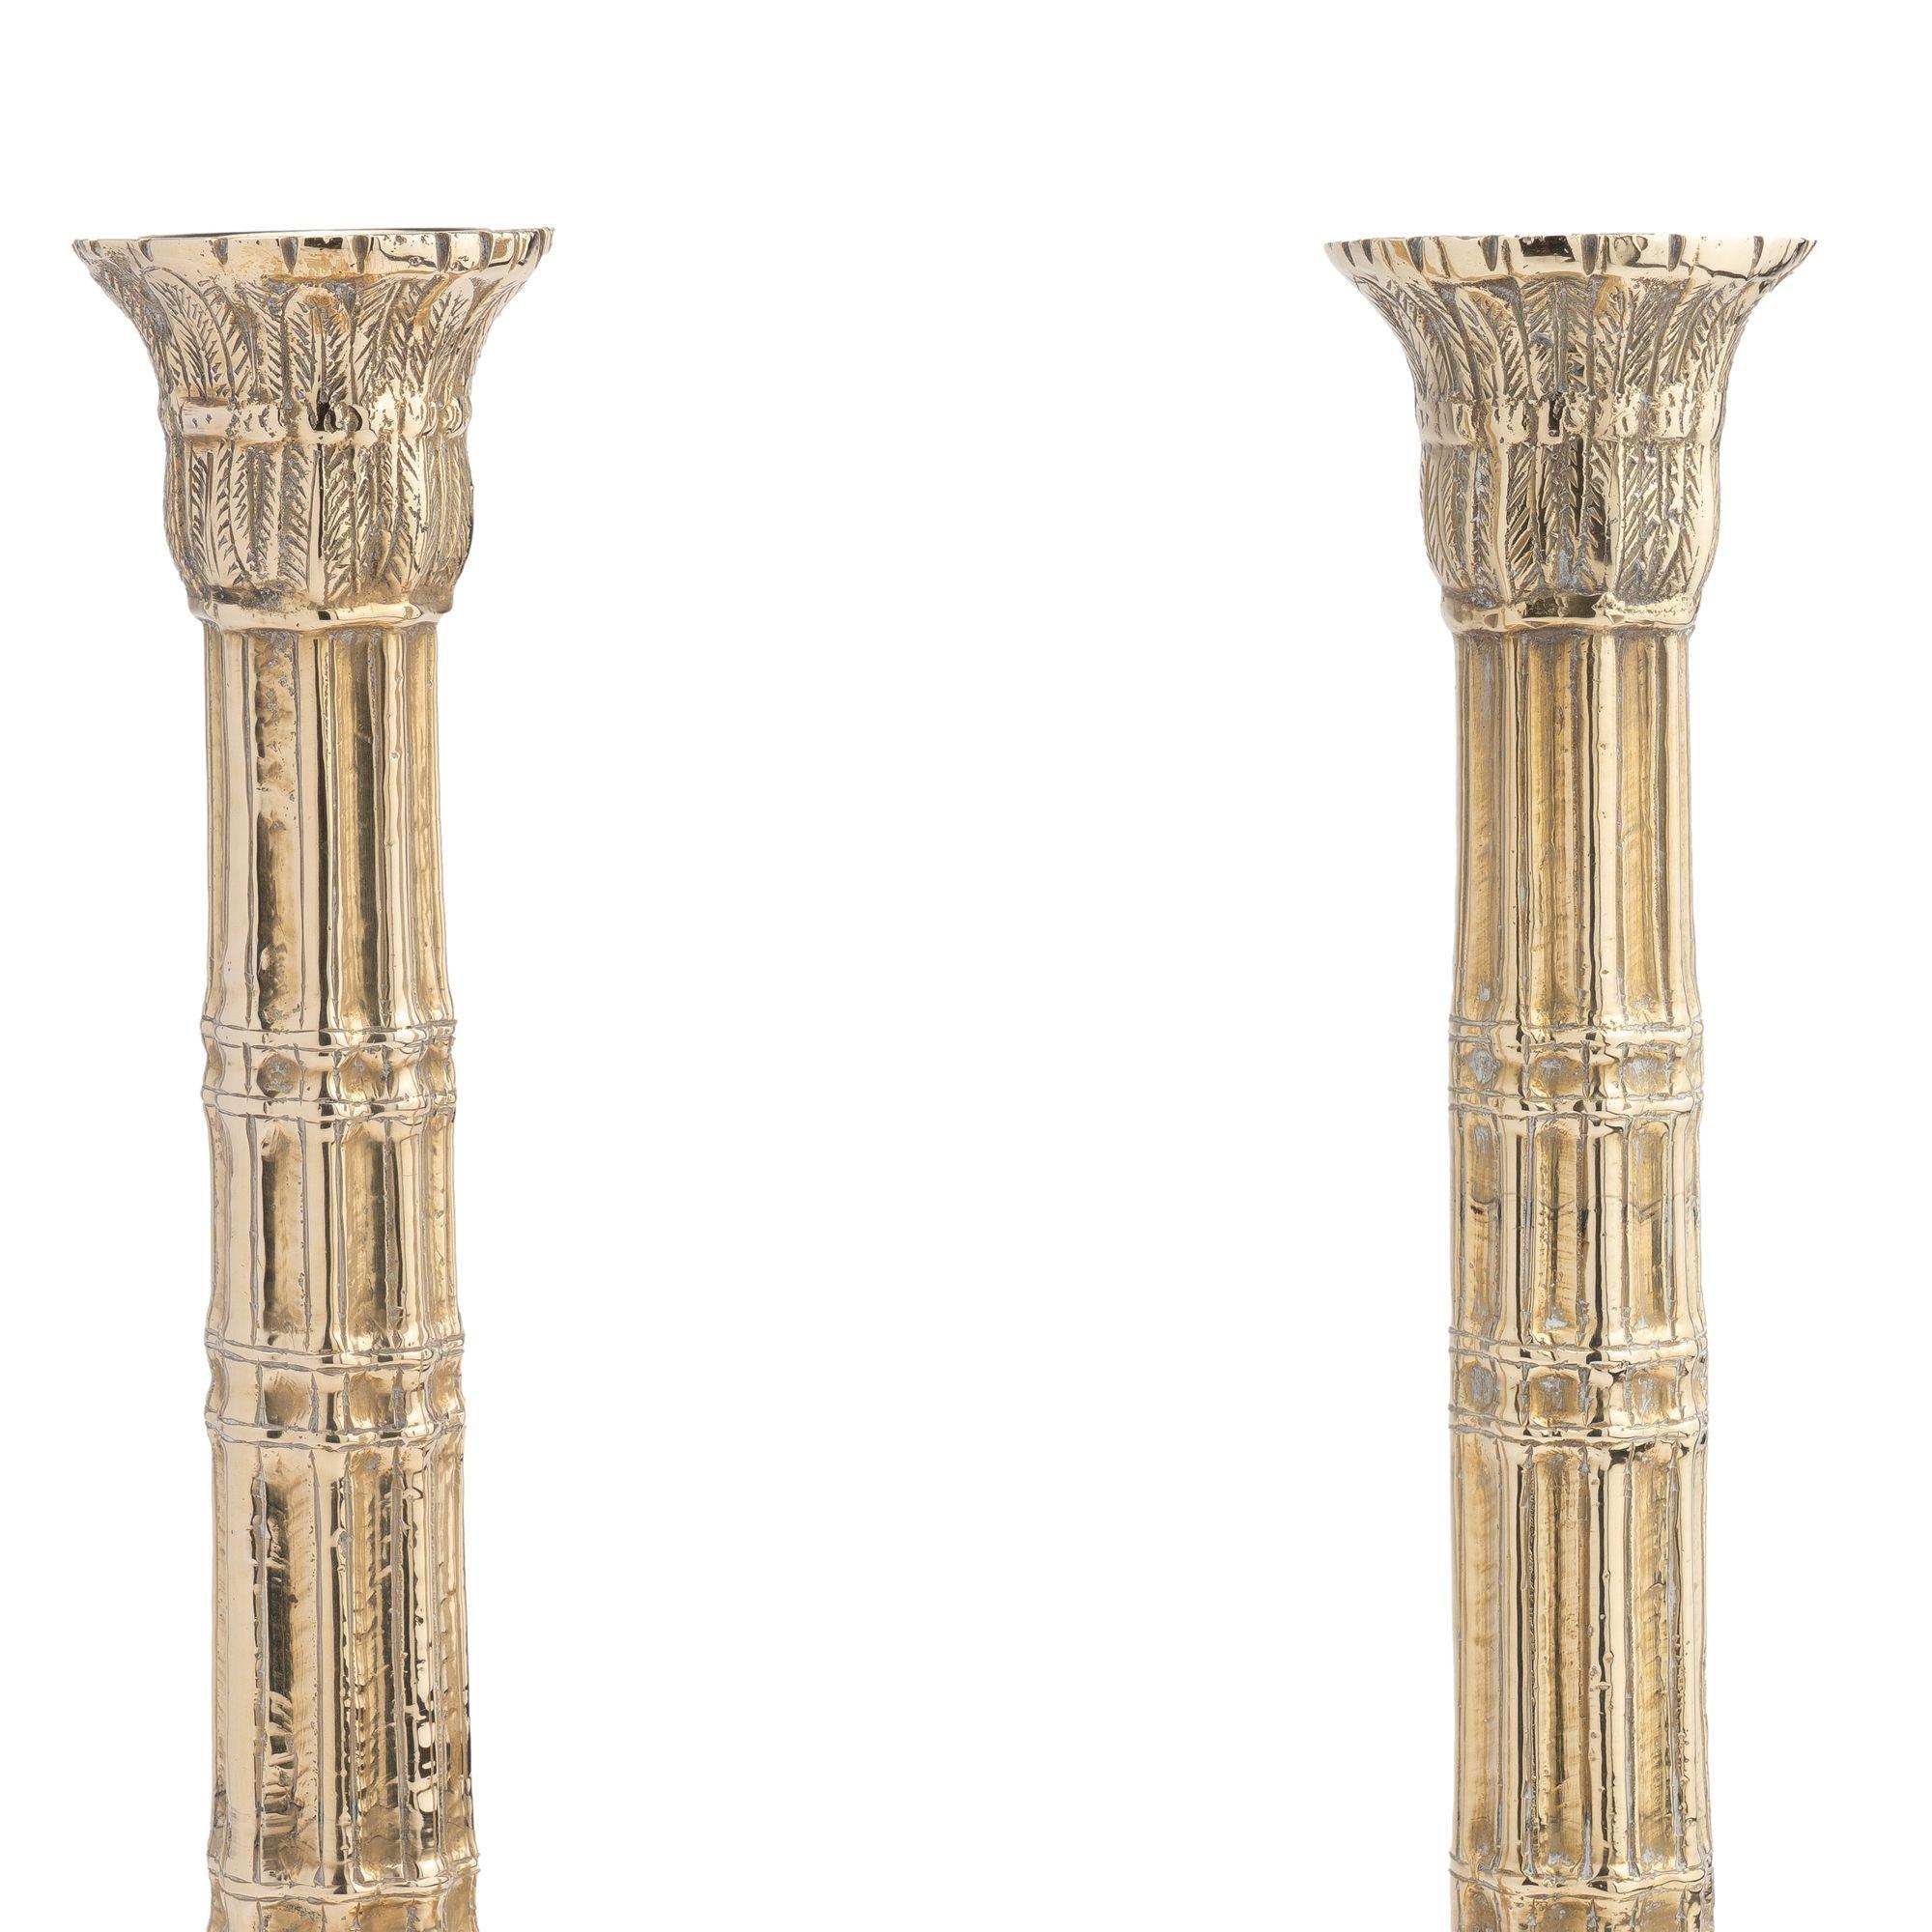 Pair of cast cluster column candlesticks by Martin, Hall & Co Ltd, 1850-75 In Good Condition For Sale In Kenilworth, IL